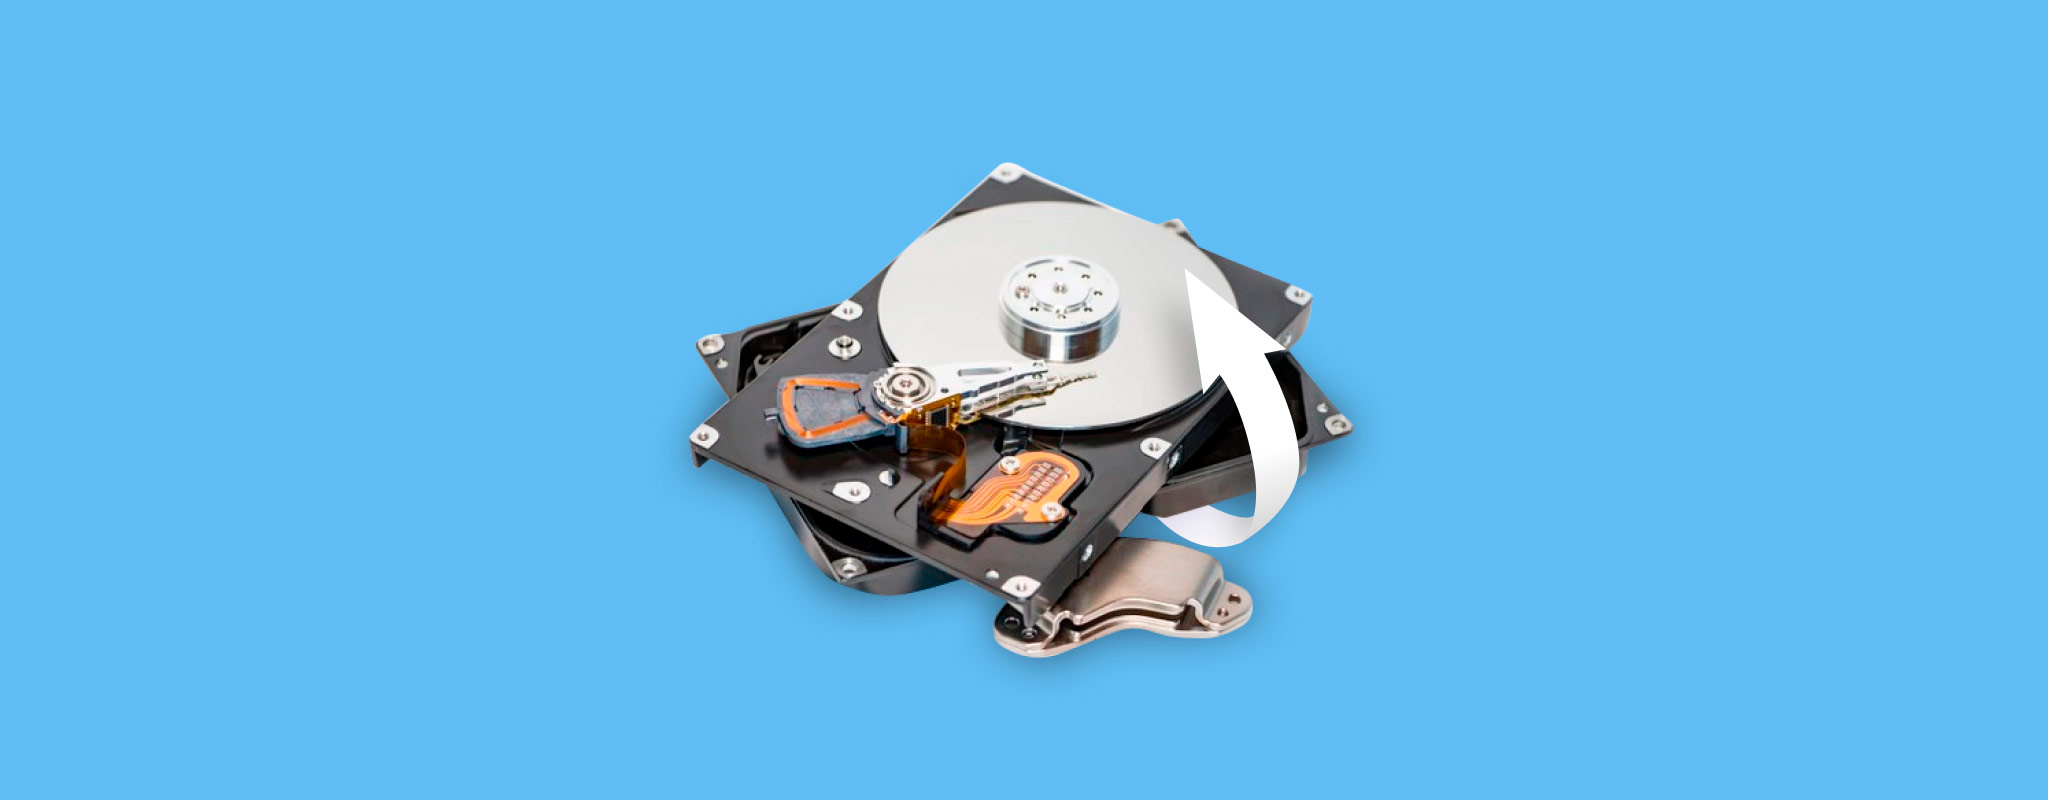 How to Easily Recover Data from a Dead Hard Drive on Windows